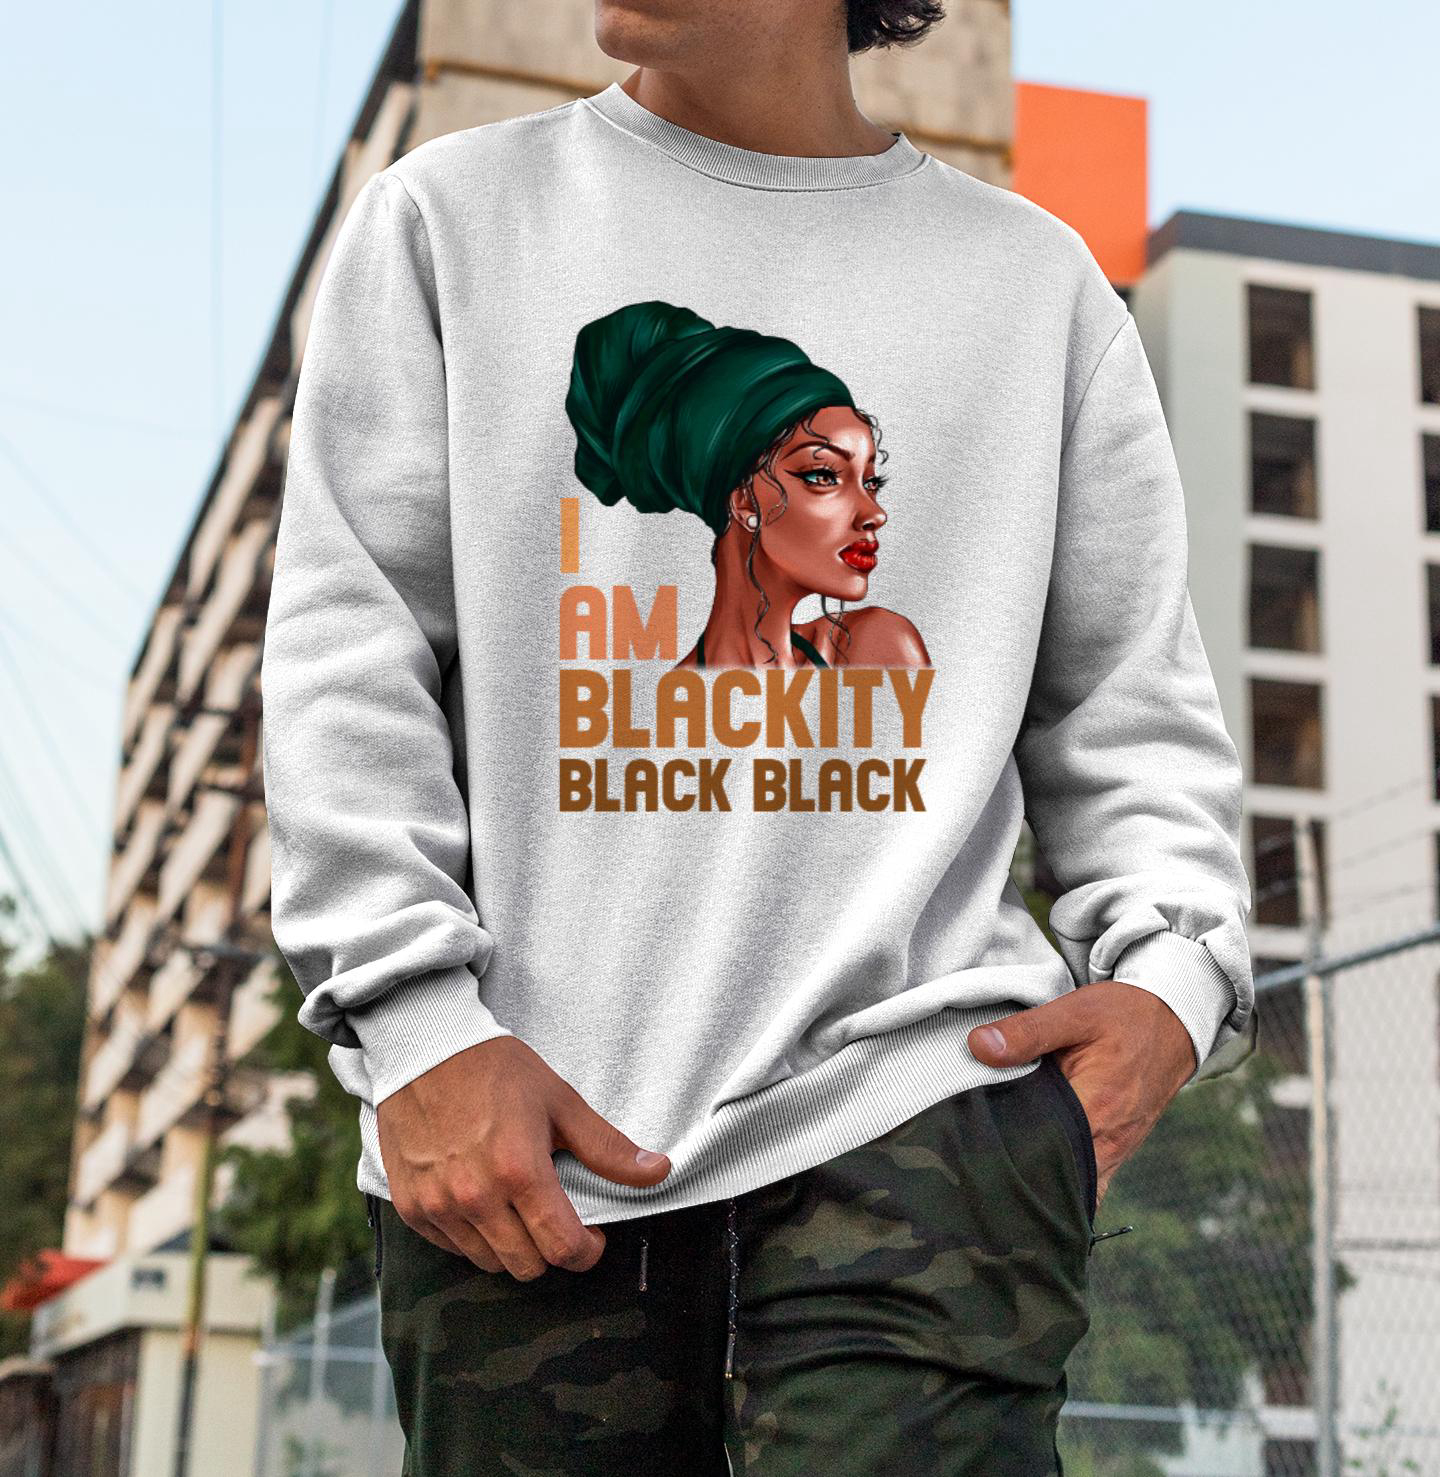 Get Ready To Embrace Your Blackness With The Blackity Black Black Shirt